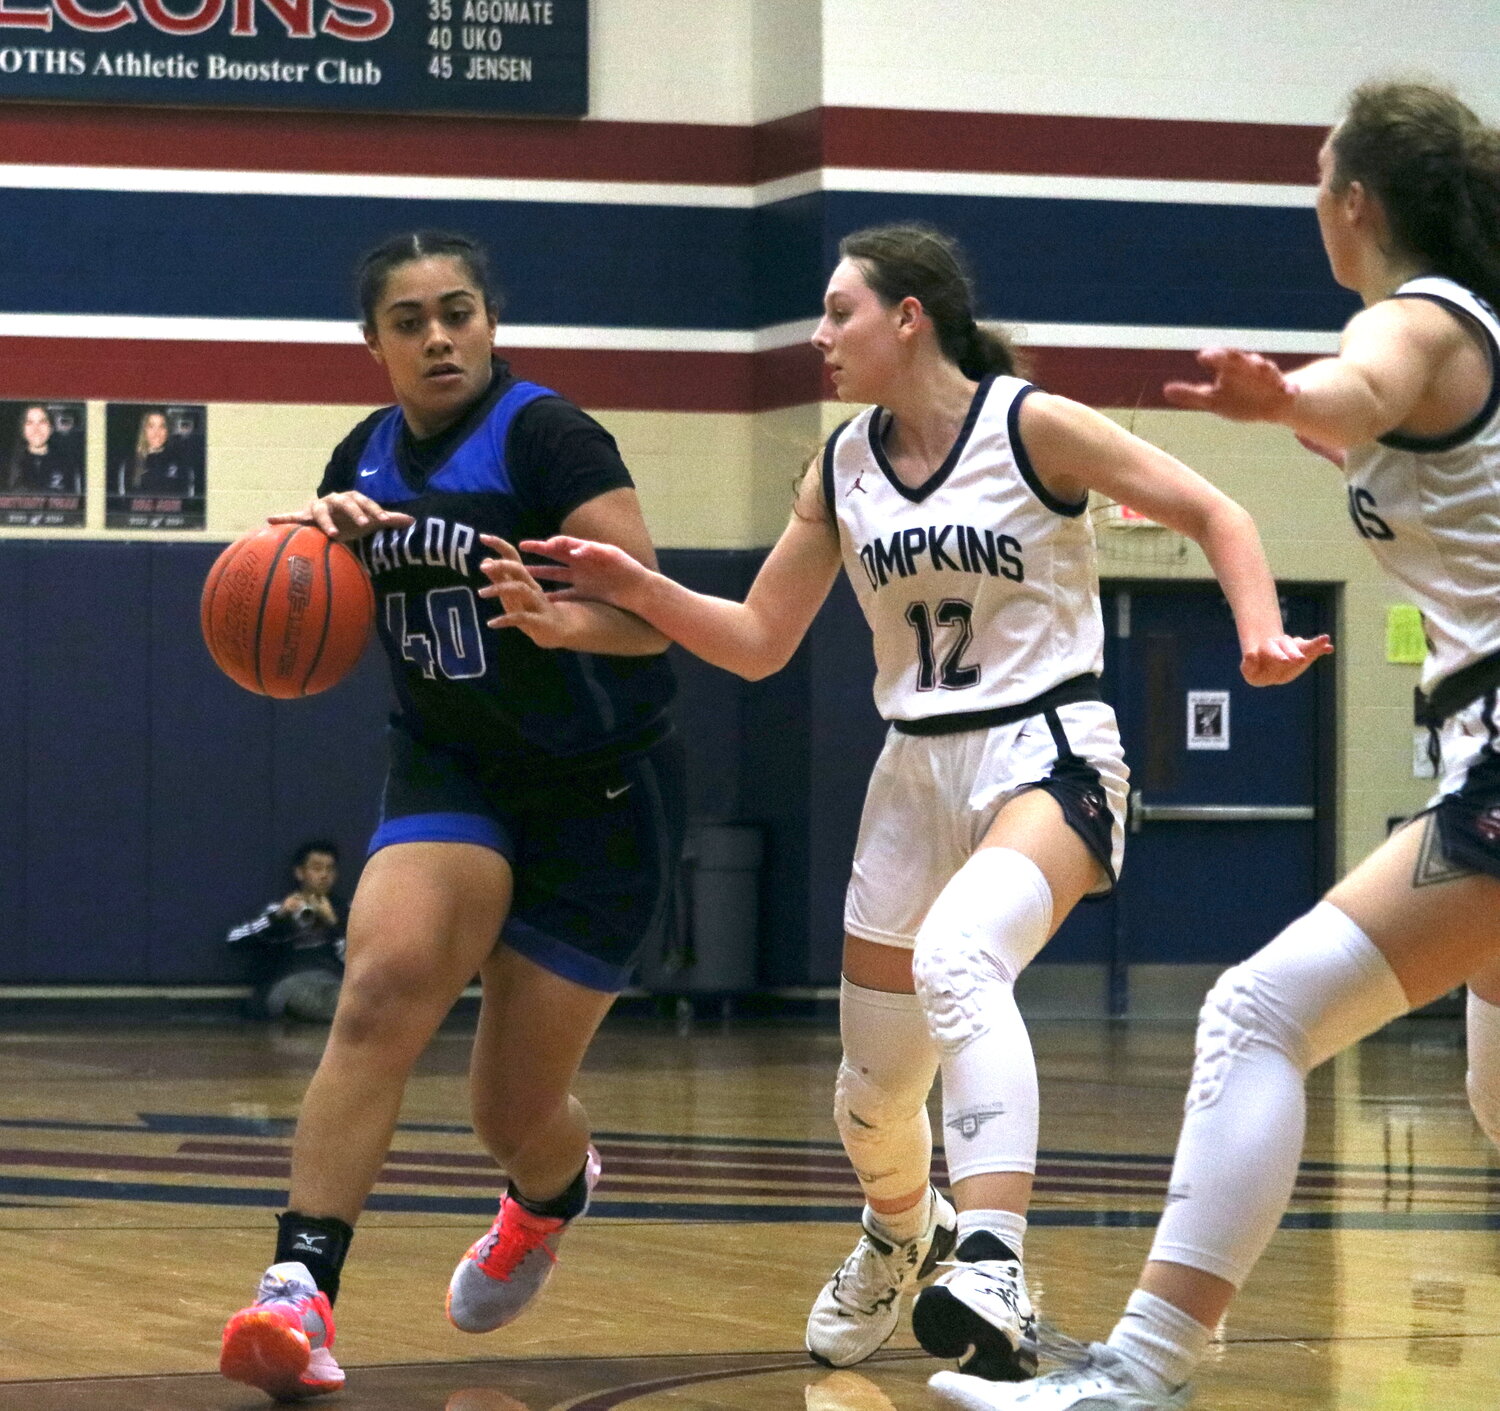 Fiapaipaitufanuaitamalii Filoialii drives to the basket during Friday's game between Taylor and Tompkins at the Tompkins gym.